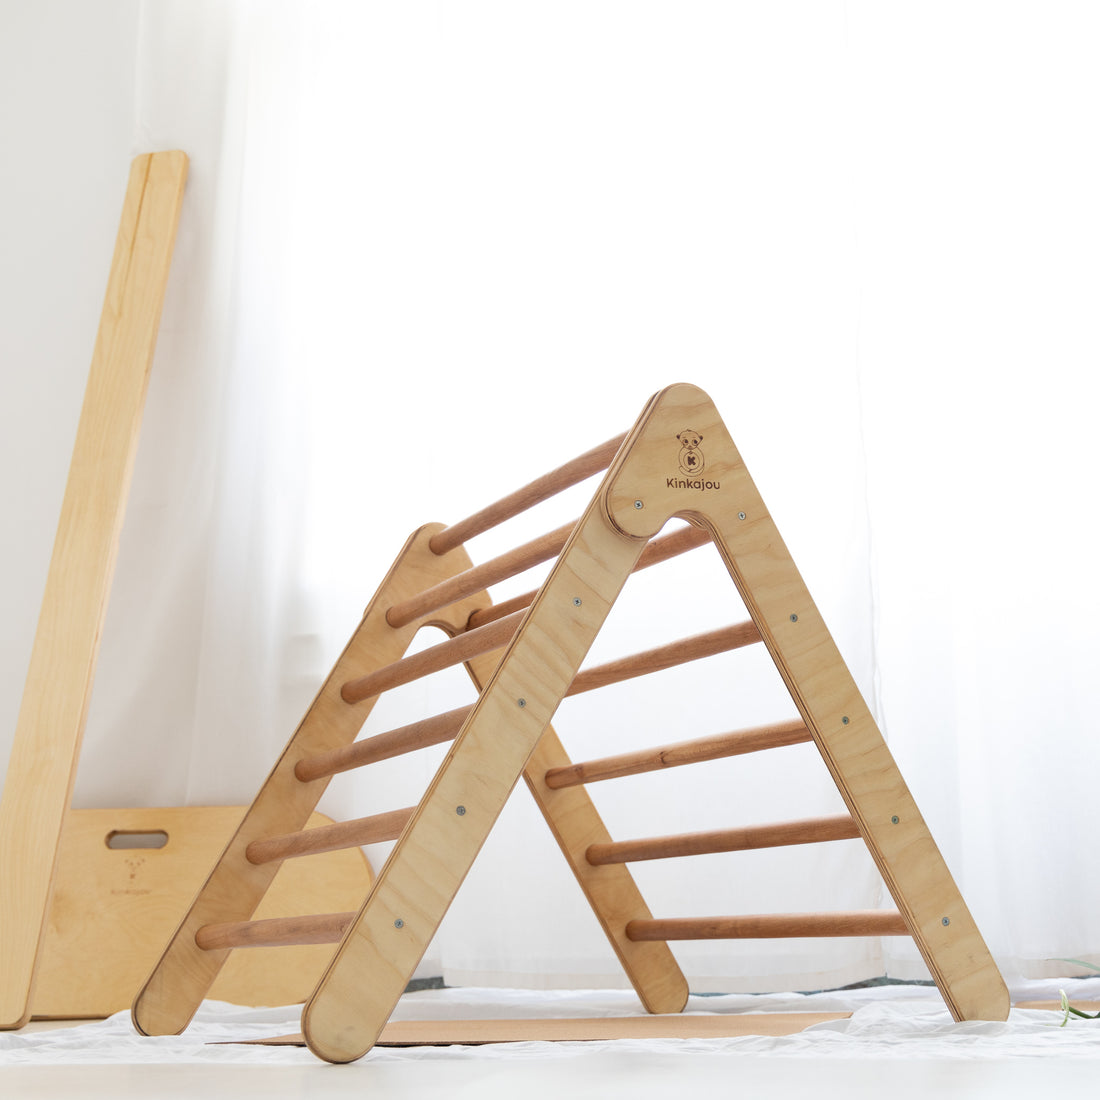 A Wooden Foldable montessori Pikler Triangle - Egypt